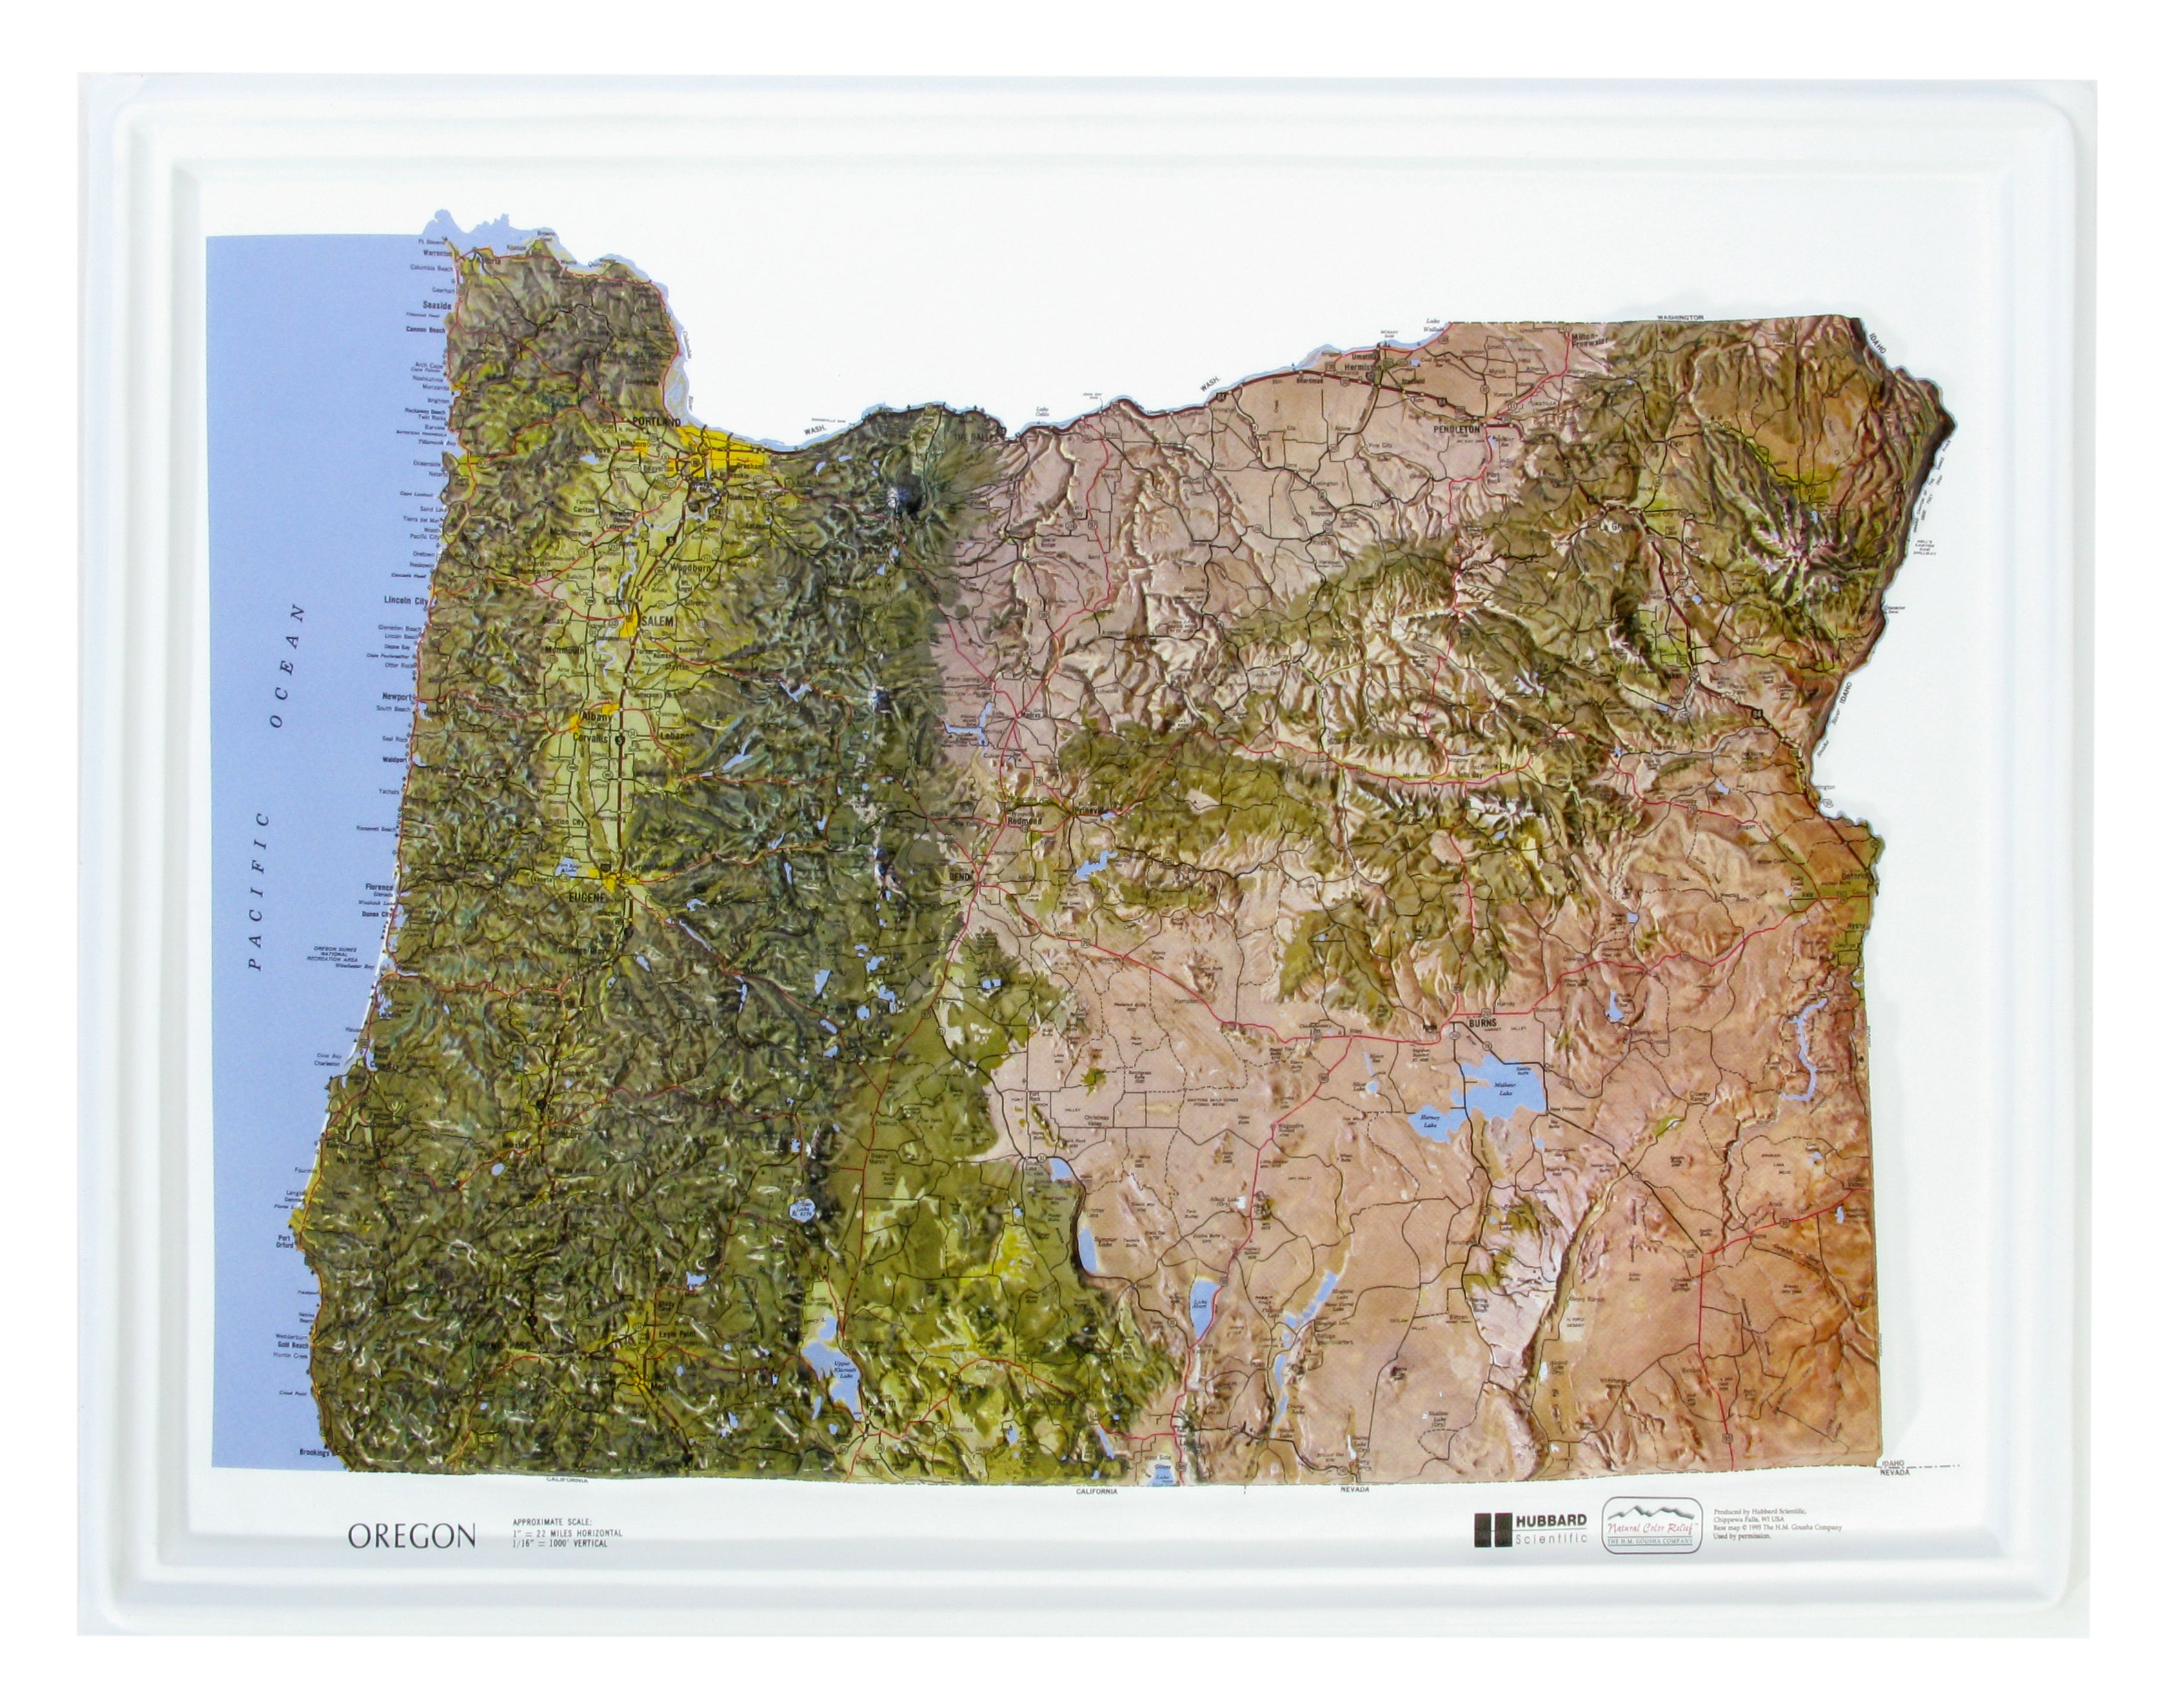 Oregon Natural Color Relief Three Dimensional 3D Raised Relief Map